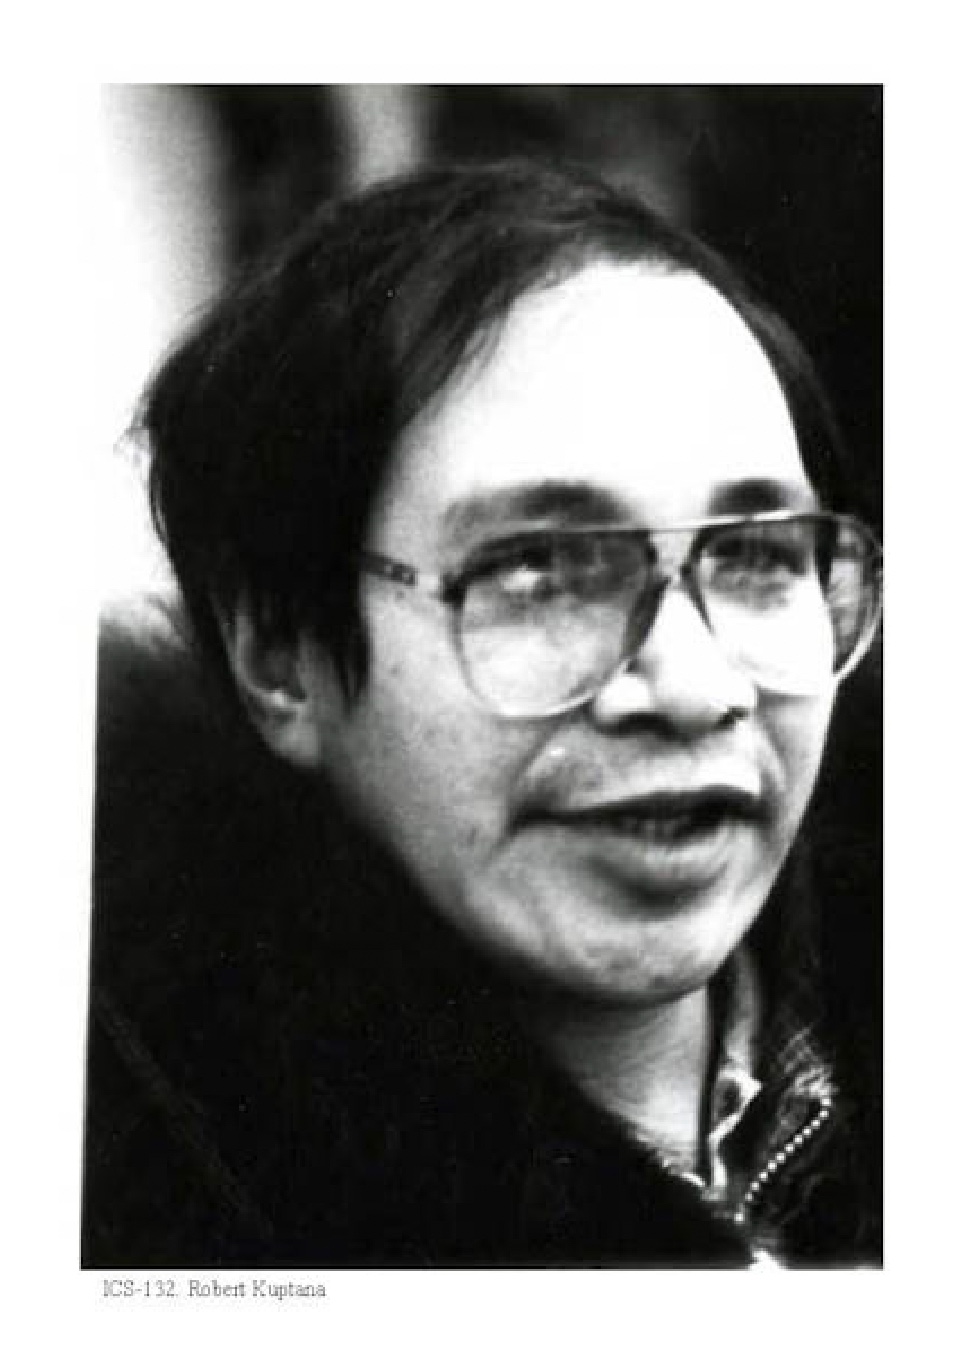 Inuvialuit Regional Corporation Remembers Robert Kuptana IRC Chairperson 1994-1995 and C.O.P.E. Negotiator for the IFA.